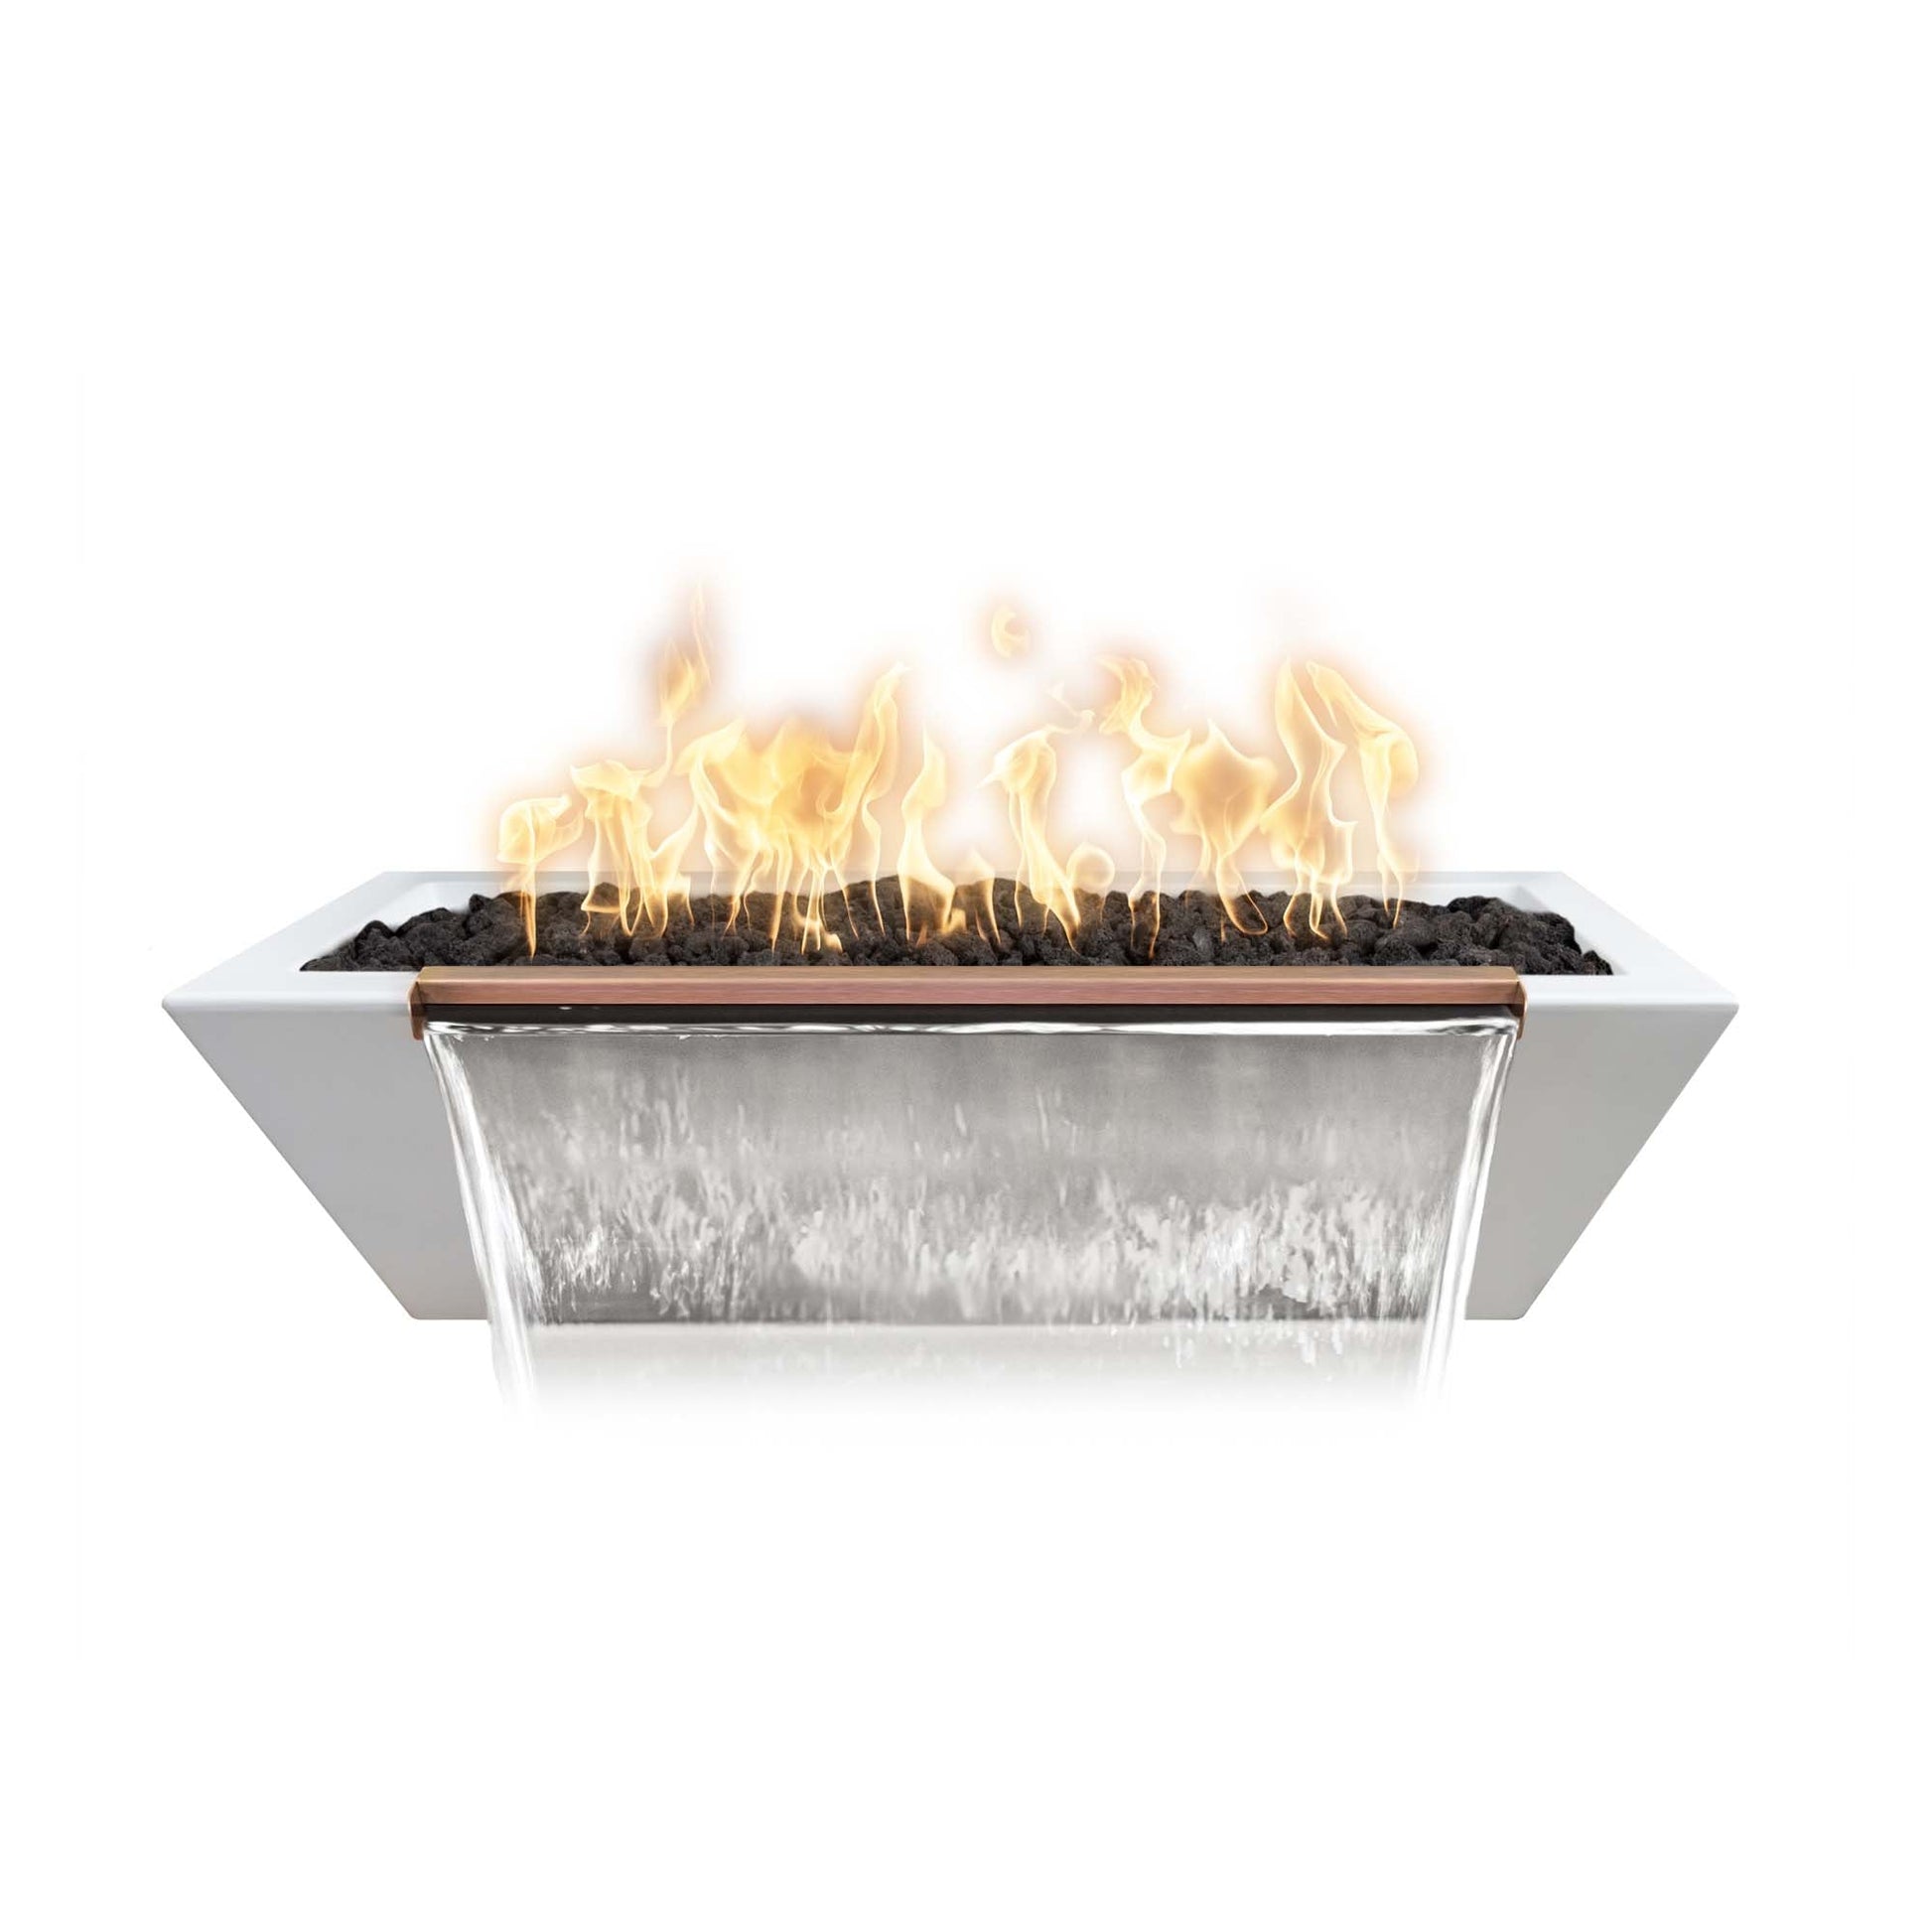 The Outdoor Plus Linear Maya 60" Rustic White GFRC Concrete Natural Gas Fire & Water Bowl with Match Lit with Flame Sense Ignition